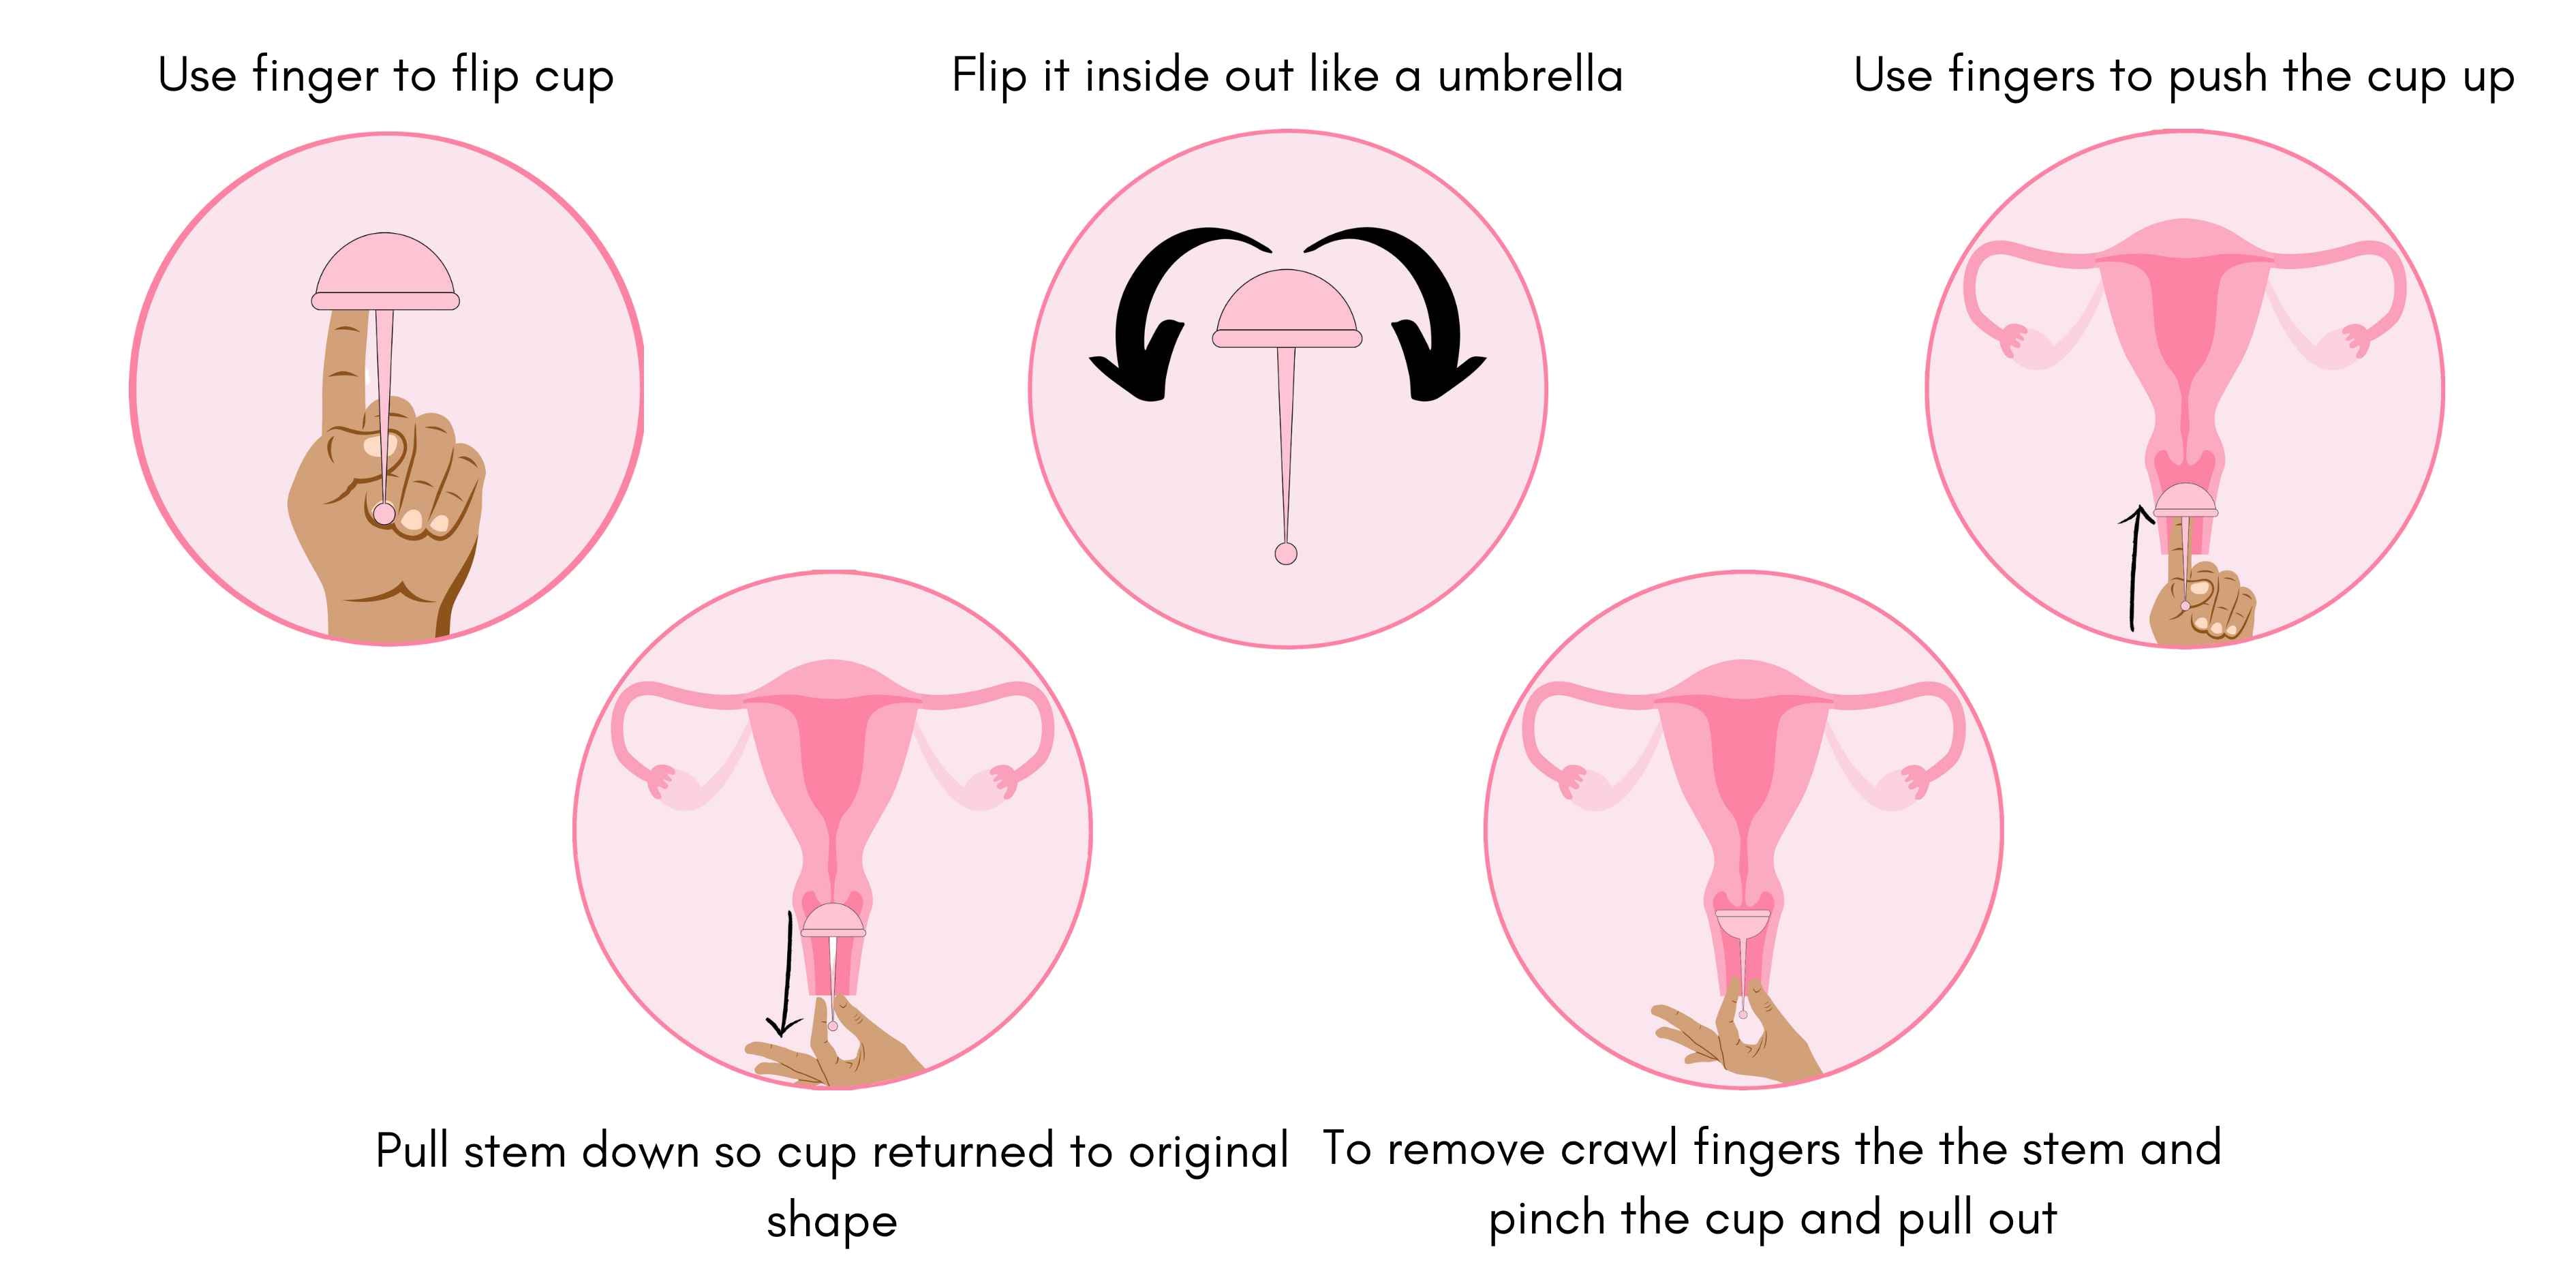 Cervix Sperm Cup used after sex or insemination to hold sperm close to the cervix, often referred to as a conception cup